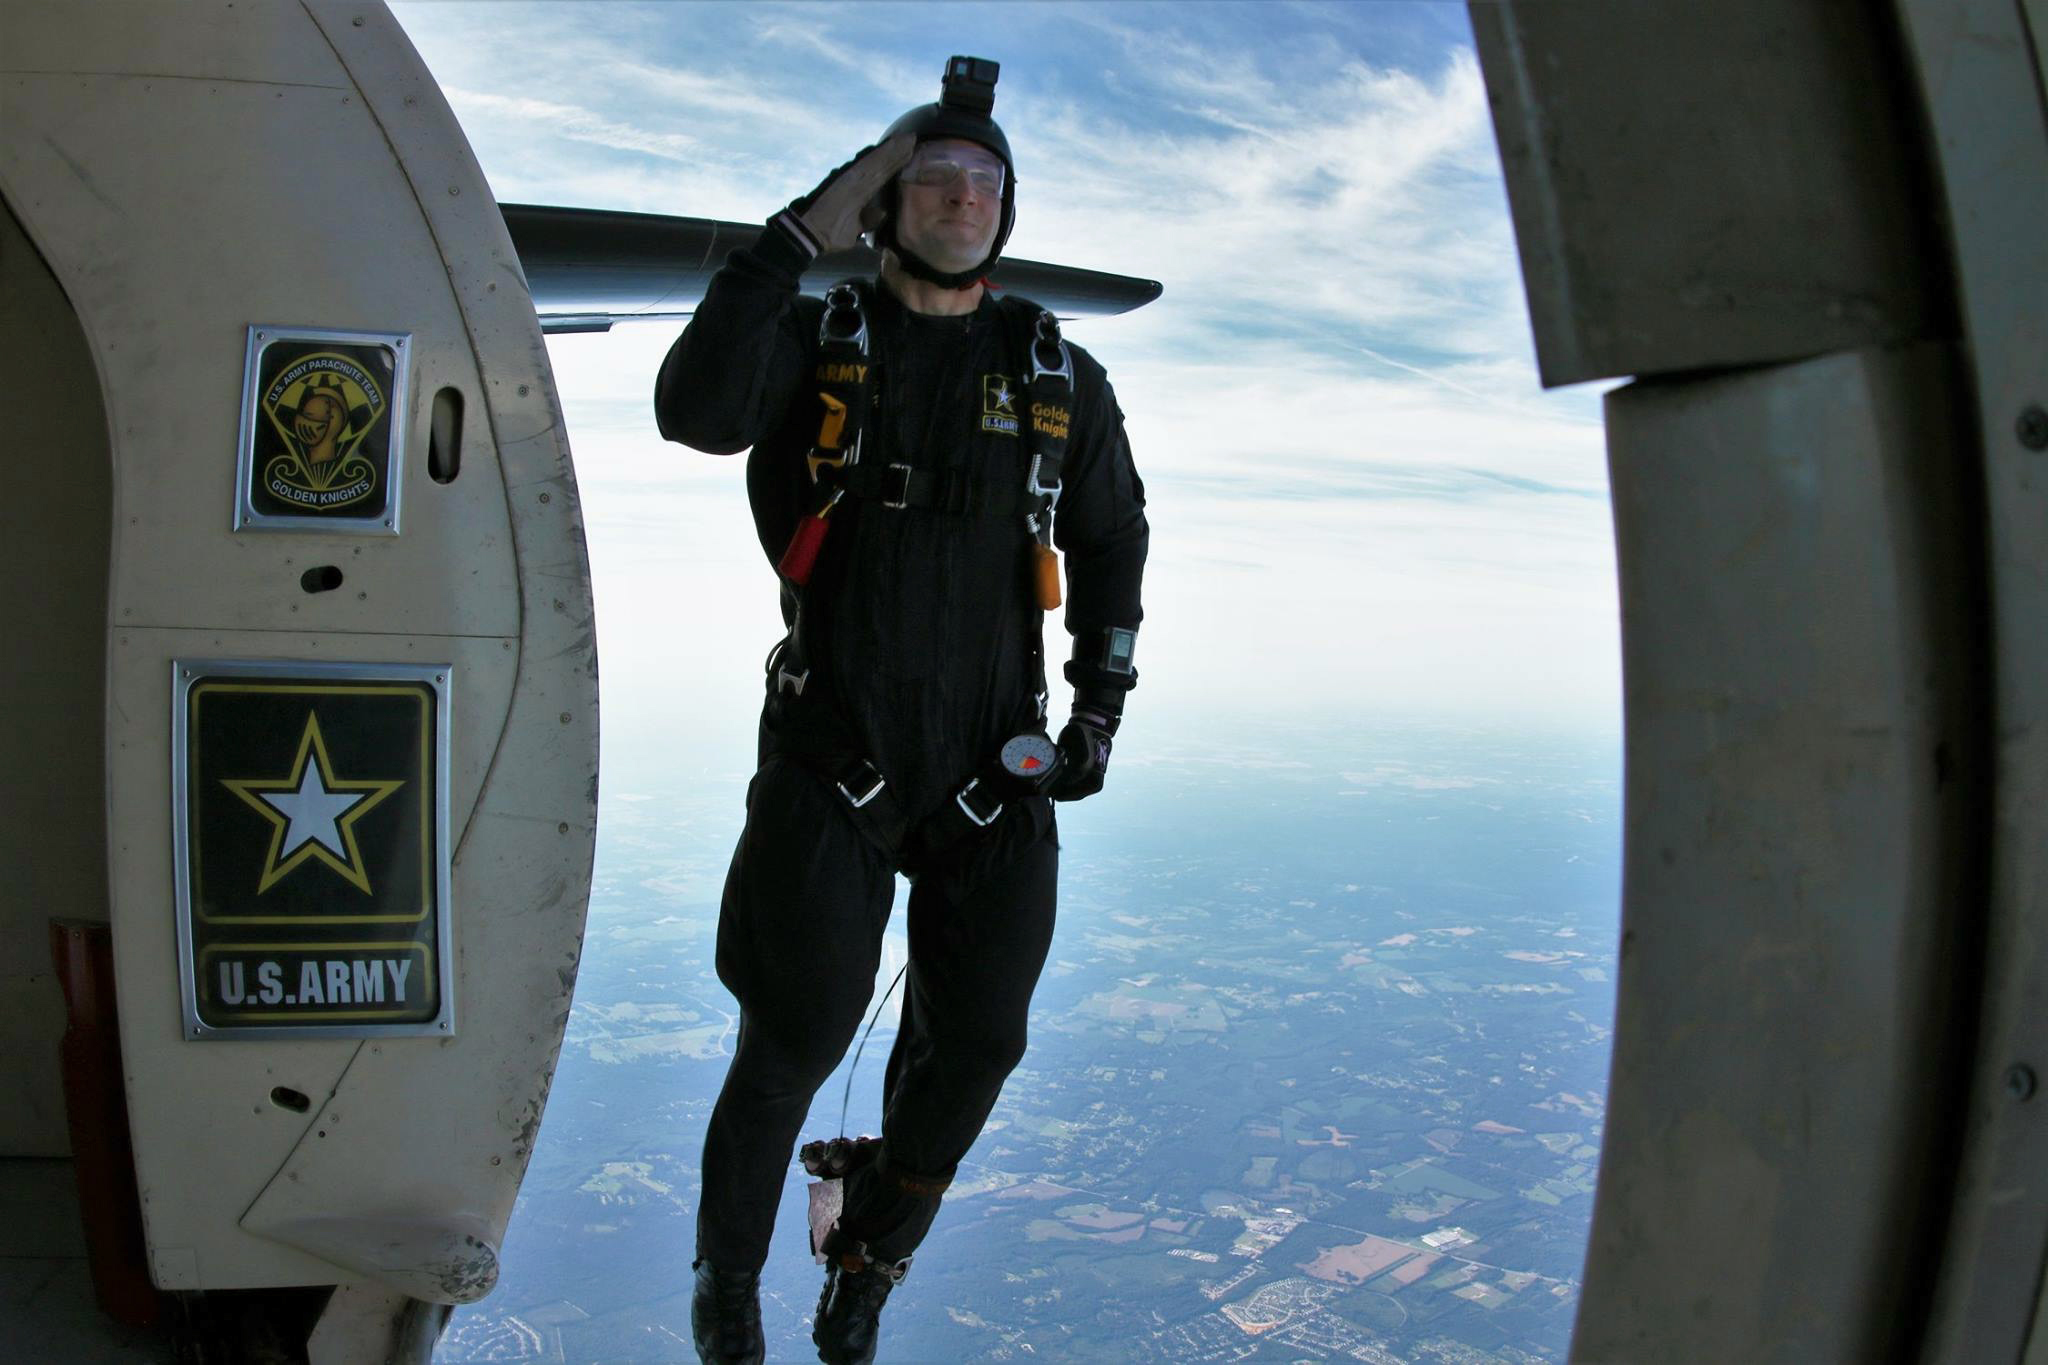 PHOTO: Sergeant First Class Dick Young jumps out of an airplane as part of his training with the Army's elite Golden Knights parachute team.